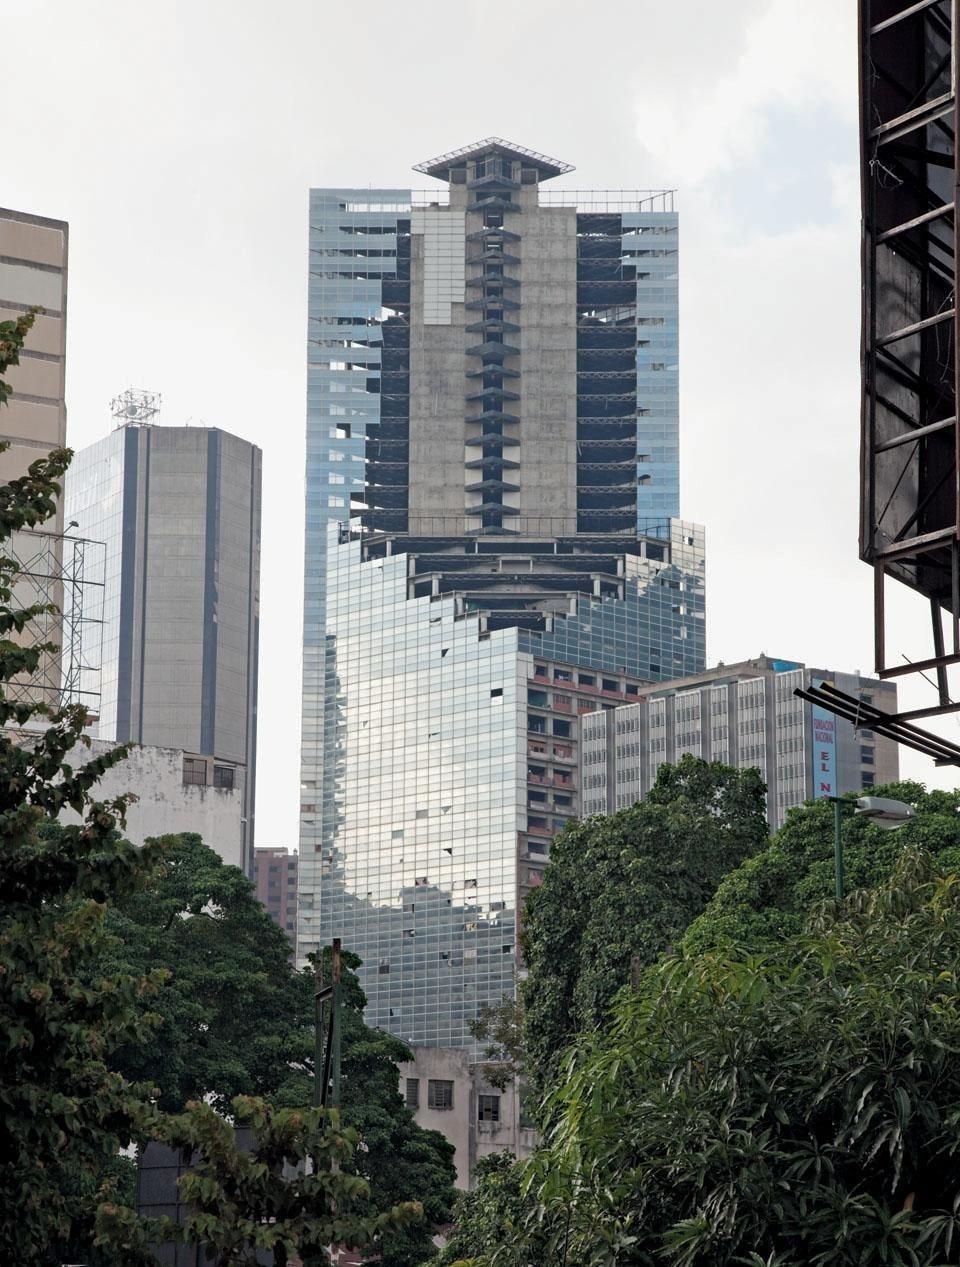 The Confinanzas Tower (The tower of David)